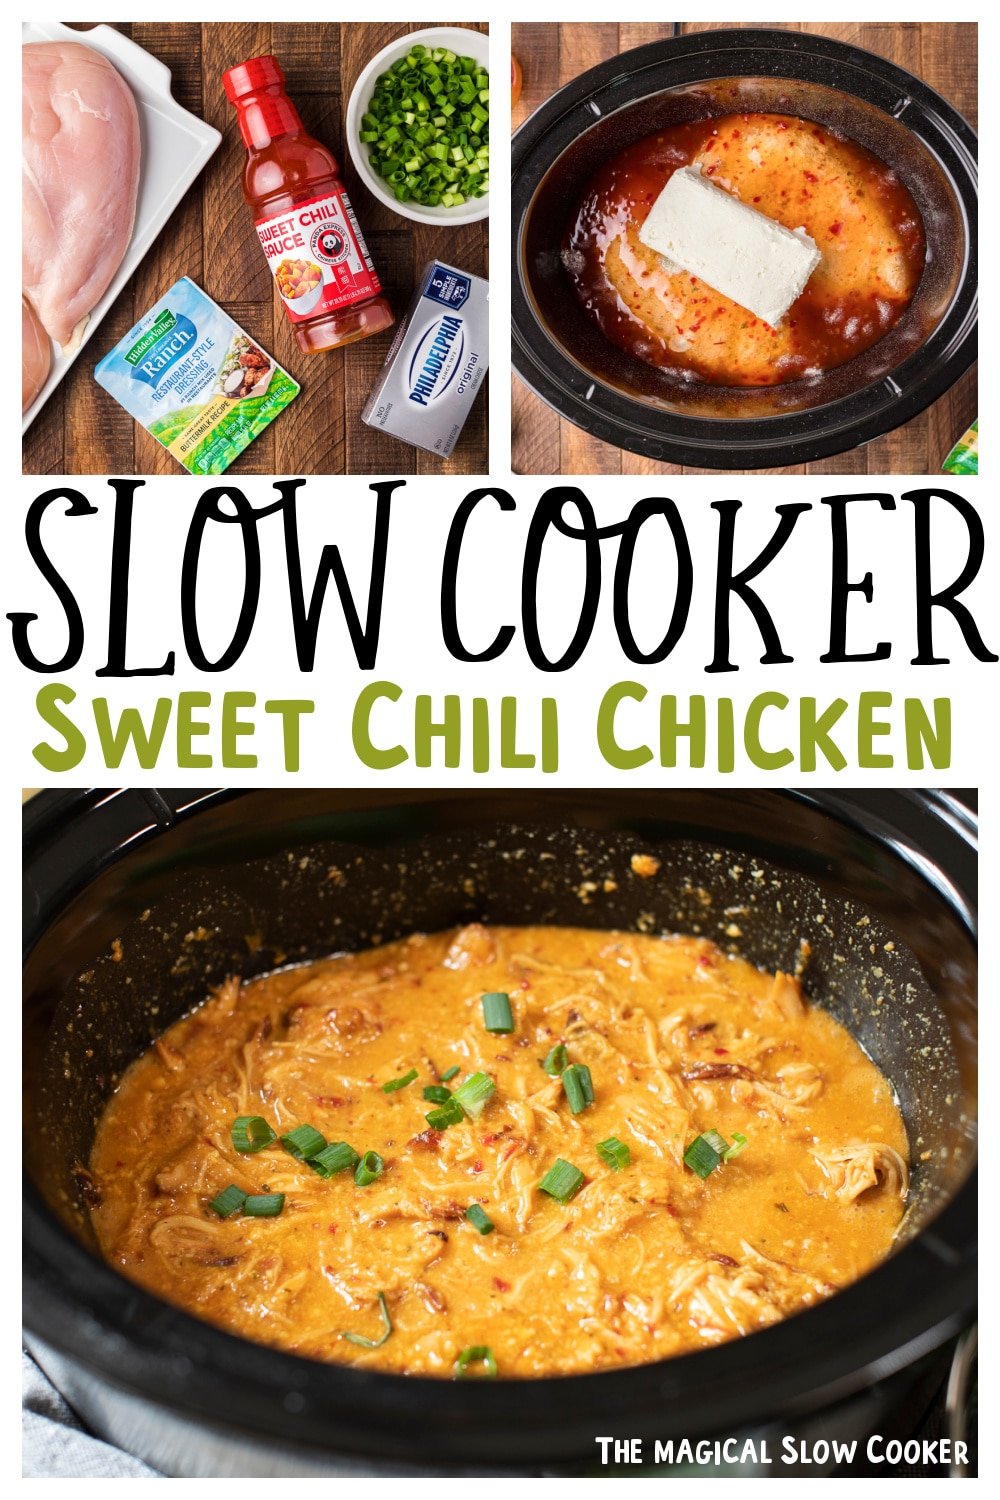 Slow Cooker Sweet Chili Chicken - The Magical Slow Cooker